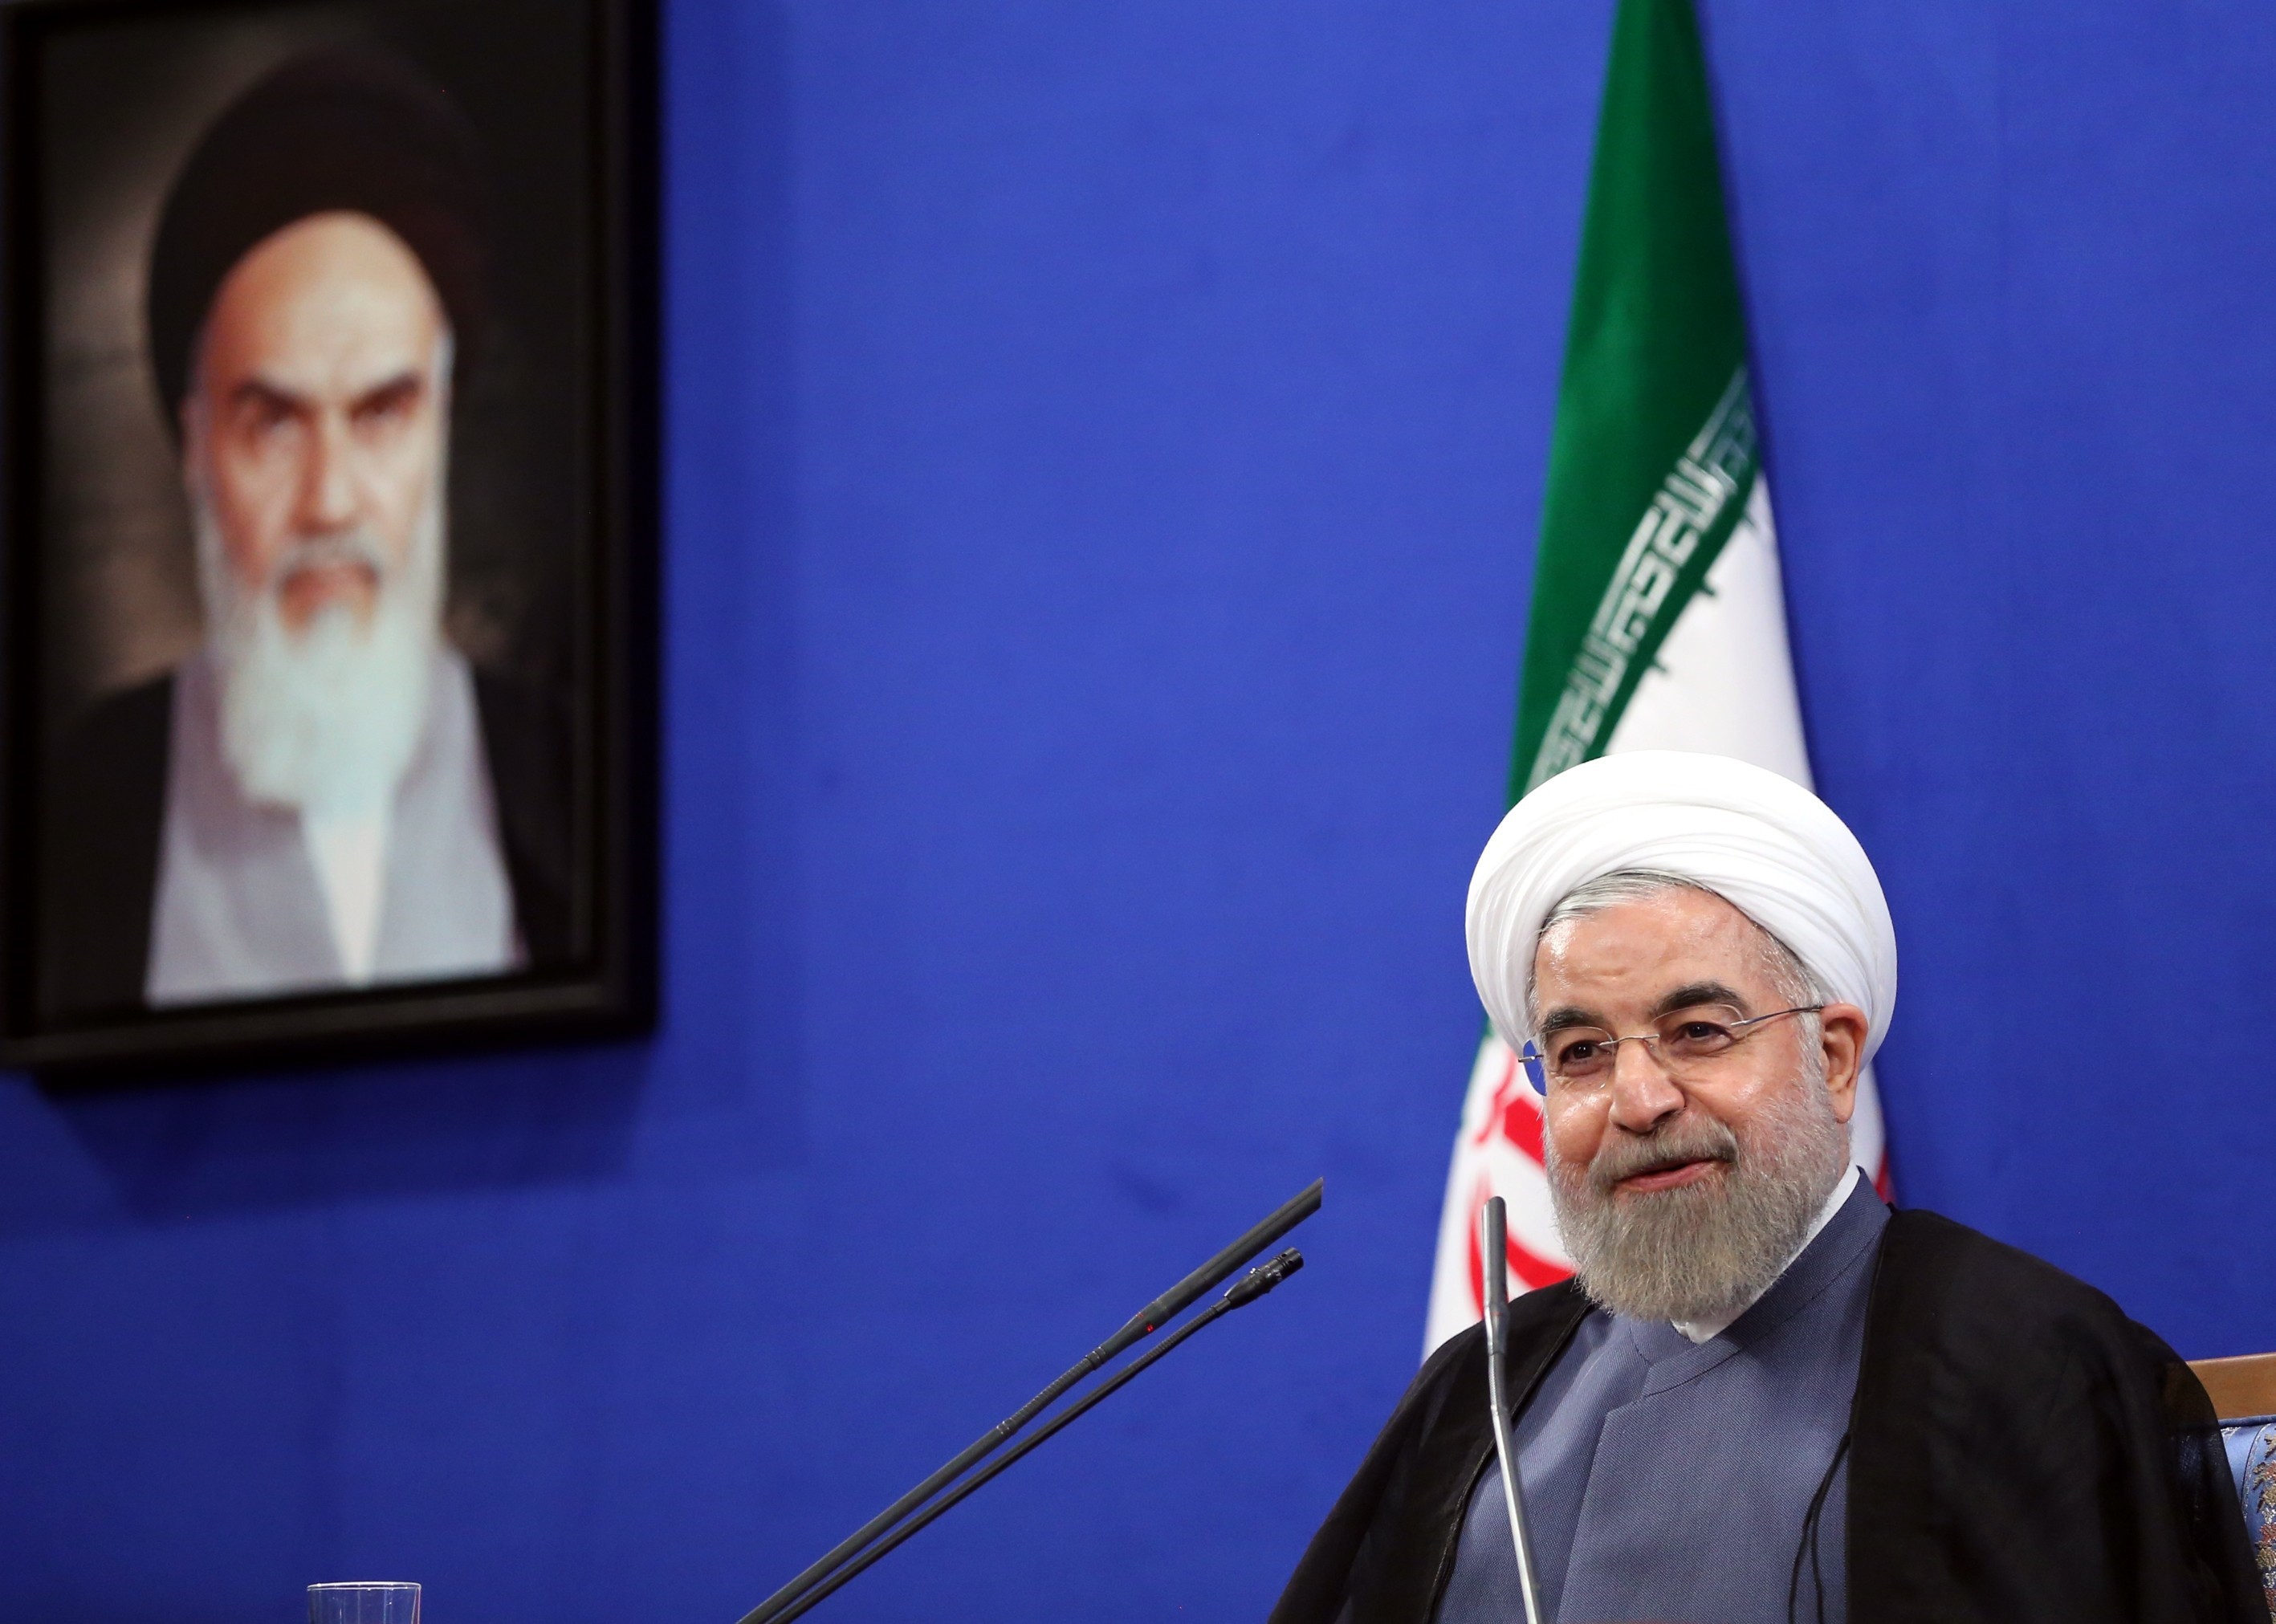 Iranian President Hassan Rouhani speaks during a press conference in Tehran, Iran on June 13, 2015.